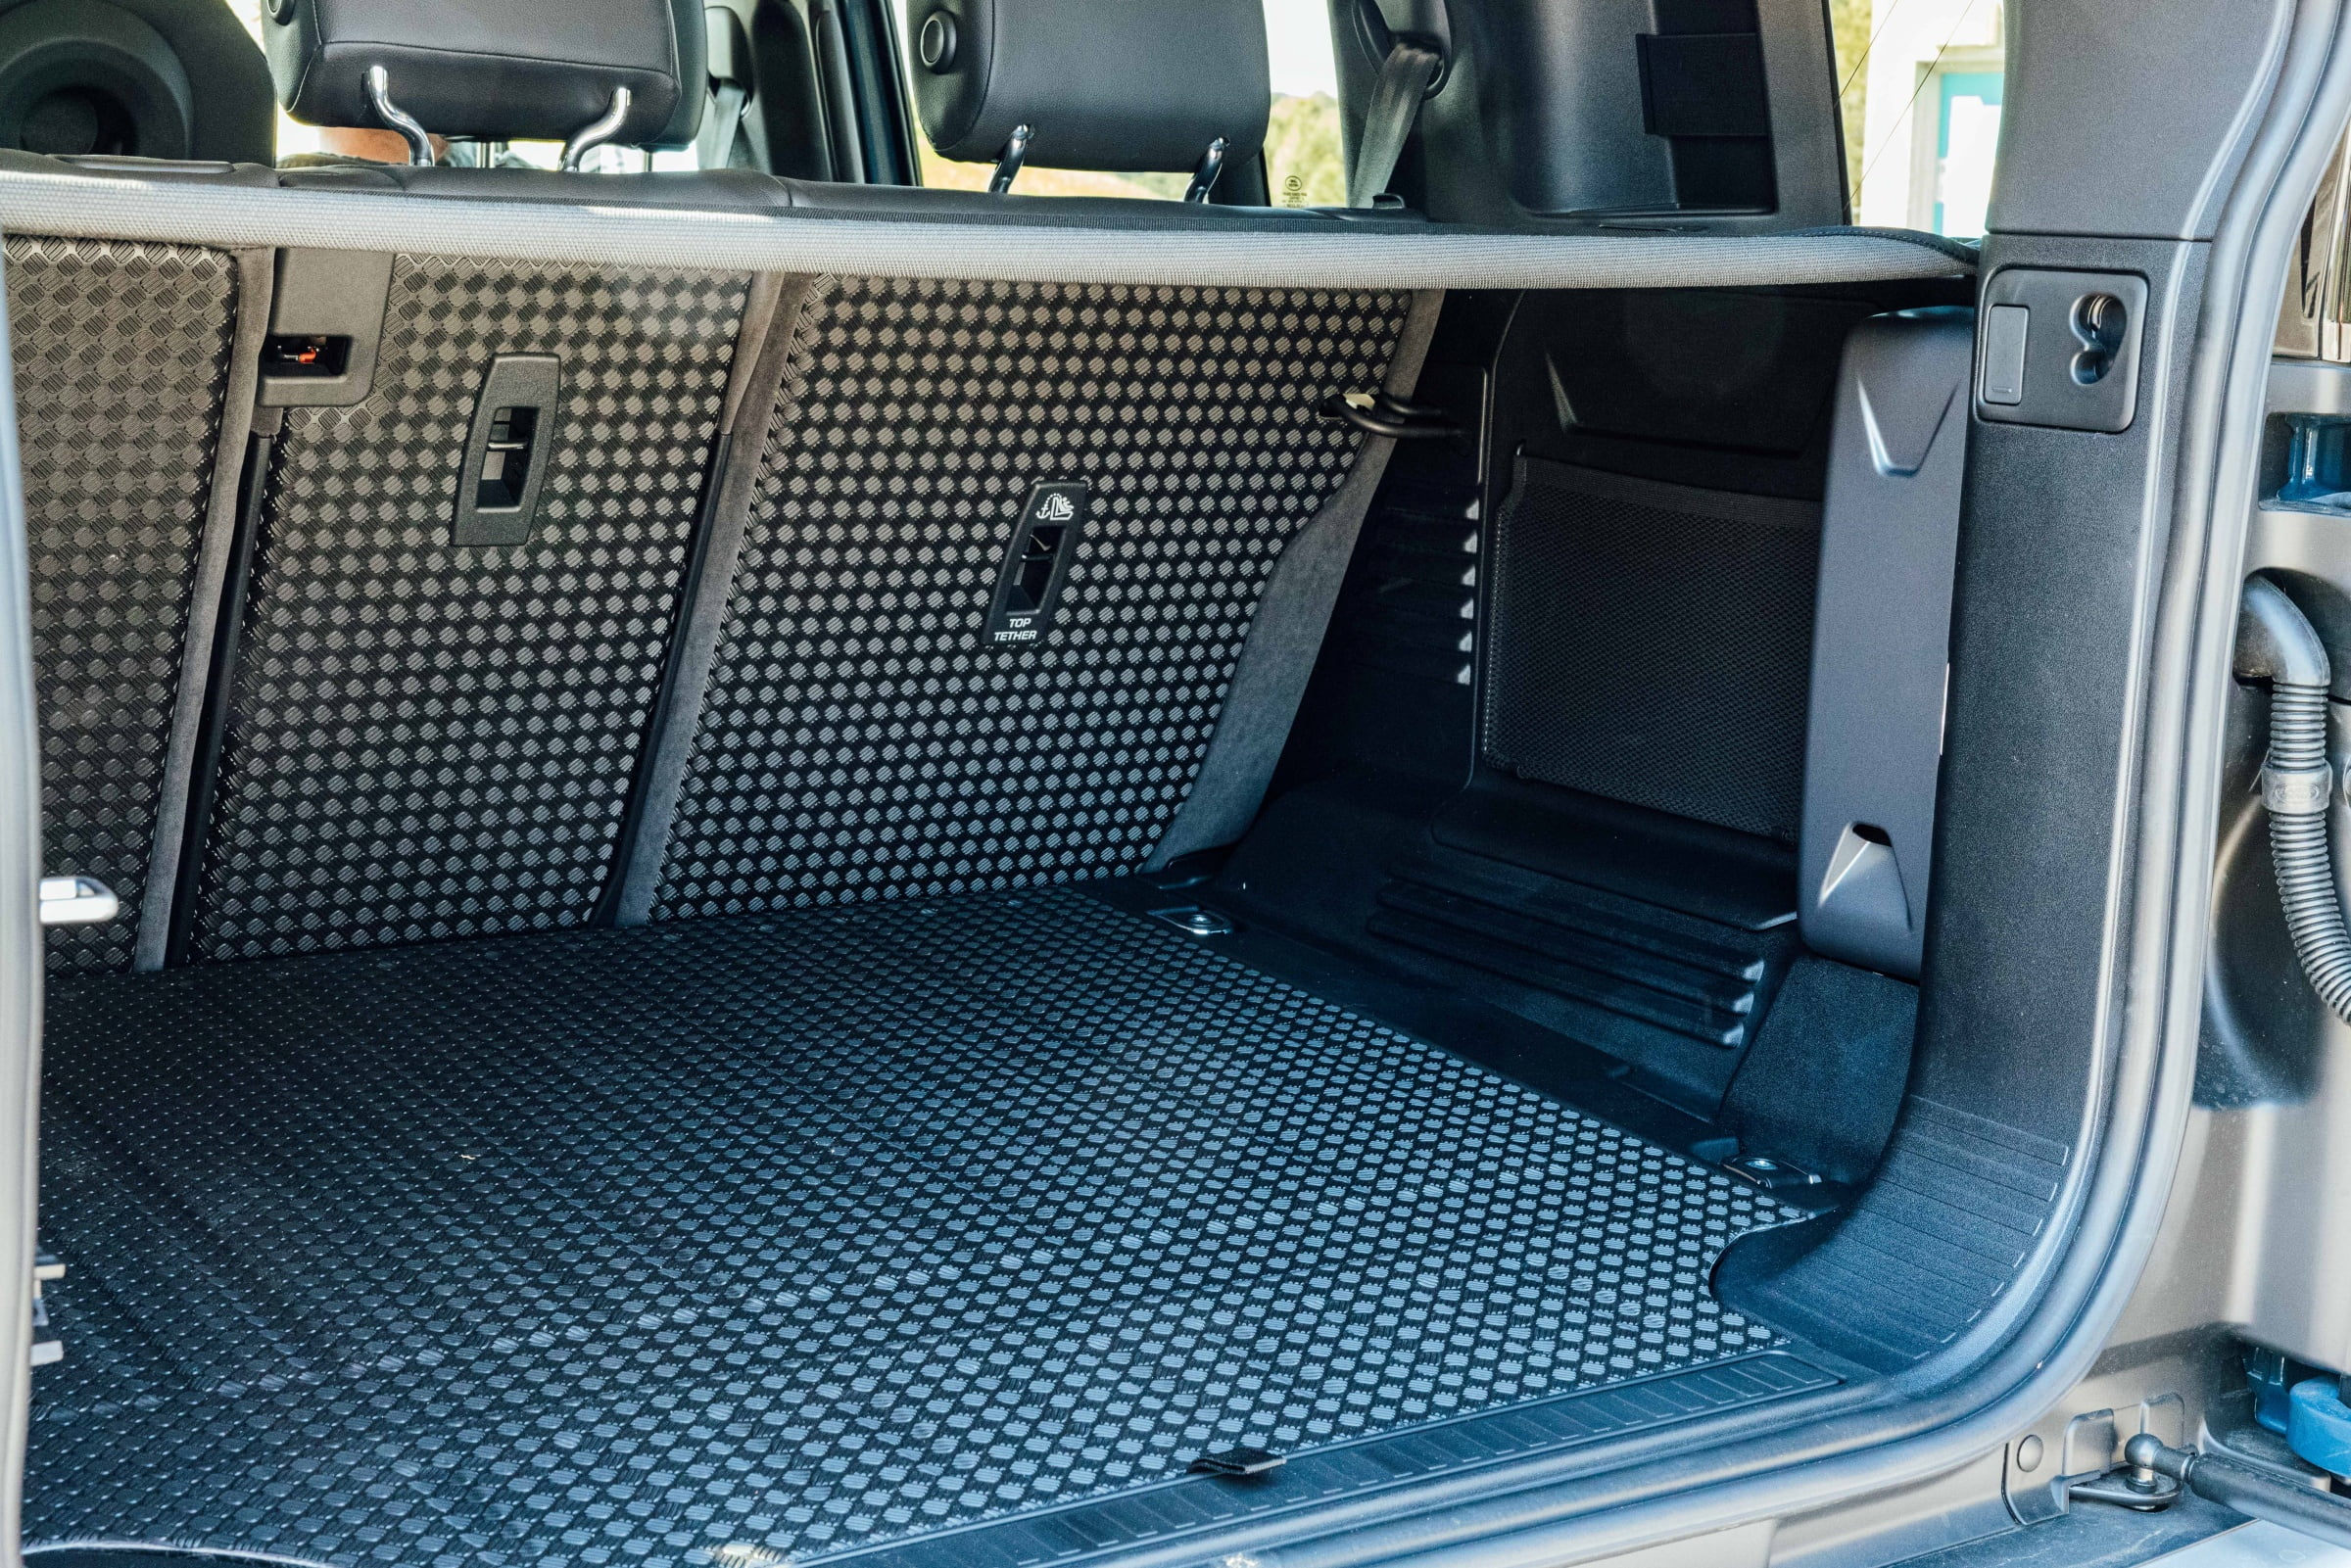 Land Rover Defender 110 boot view